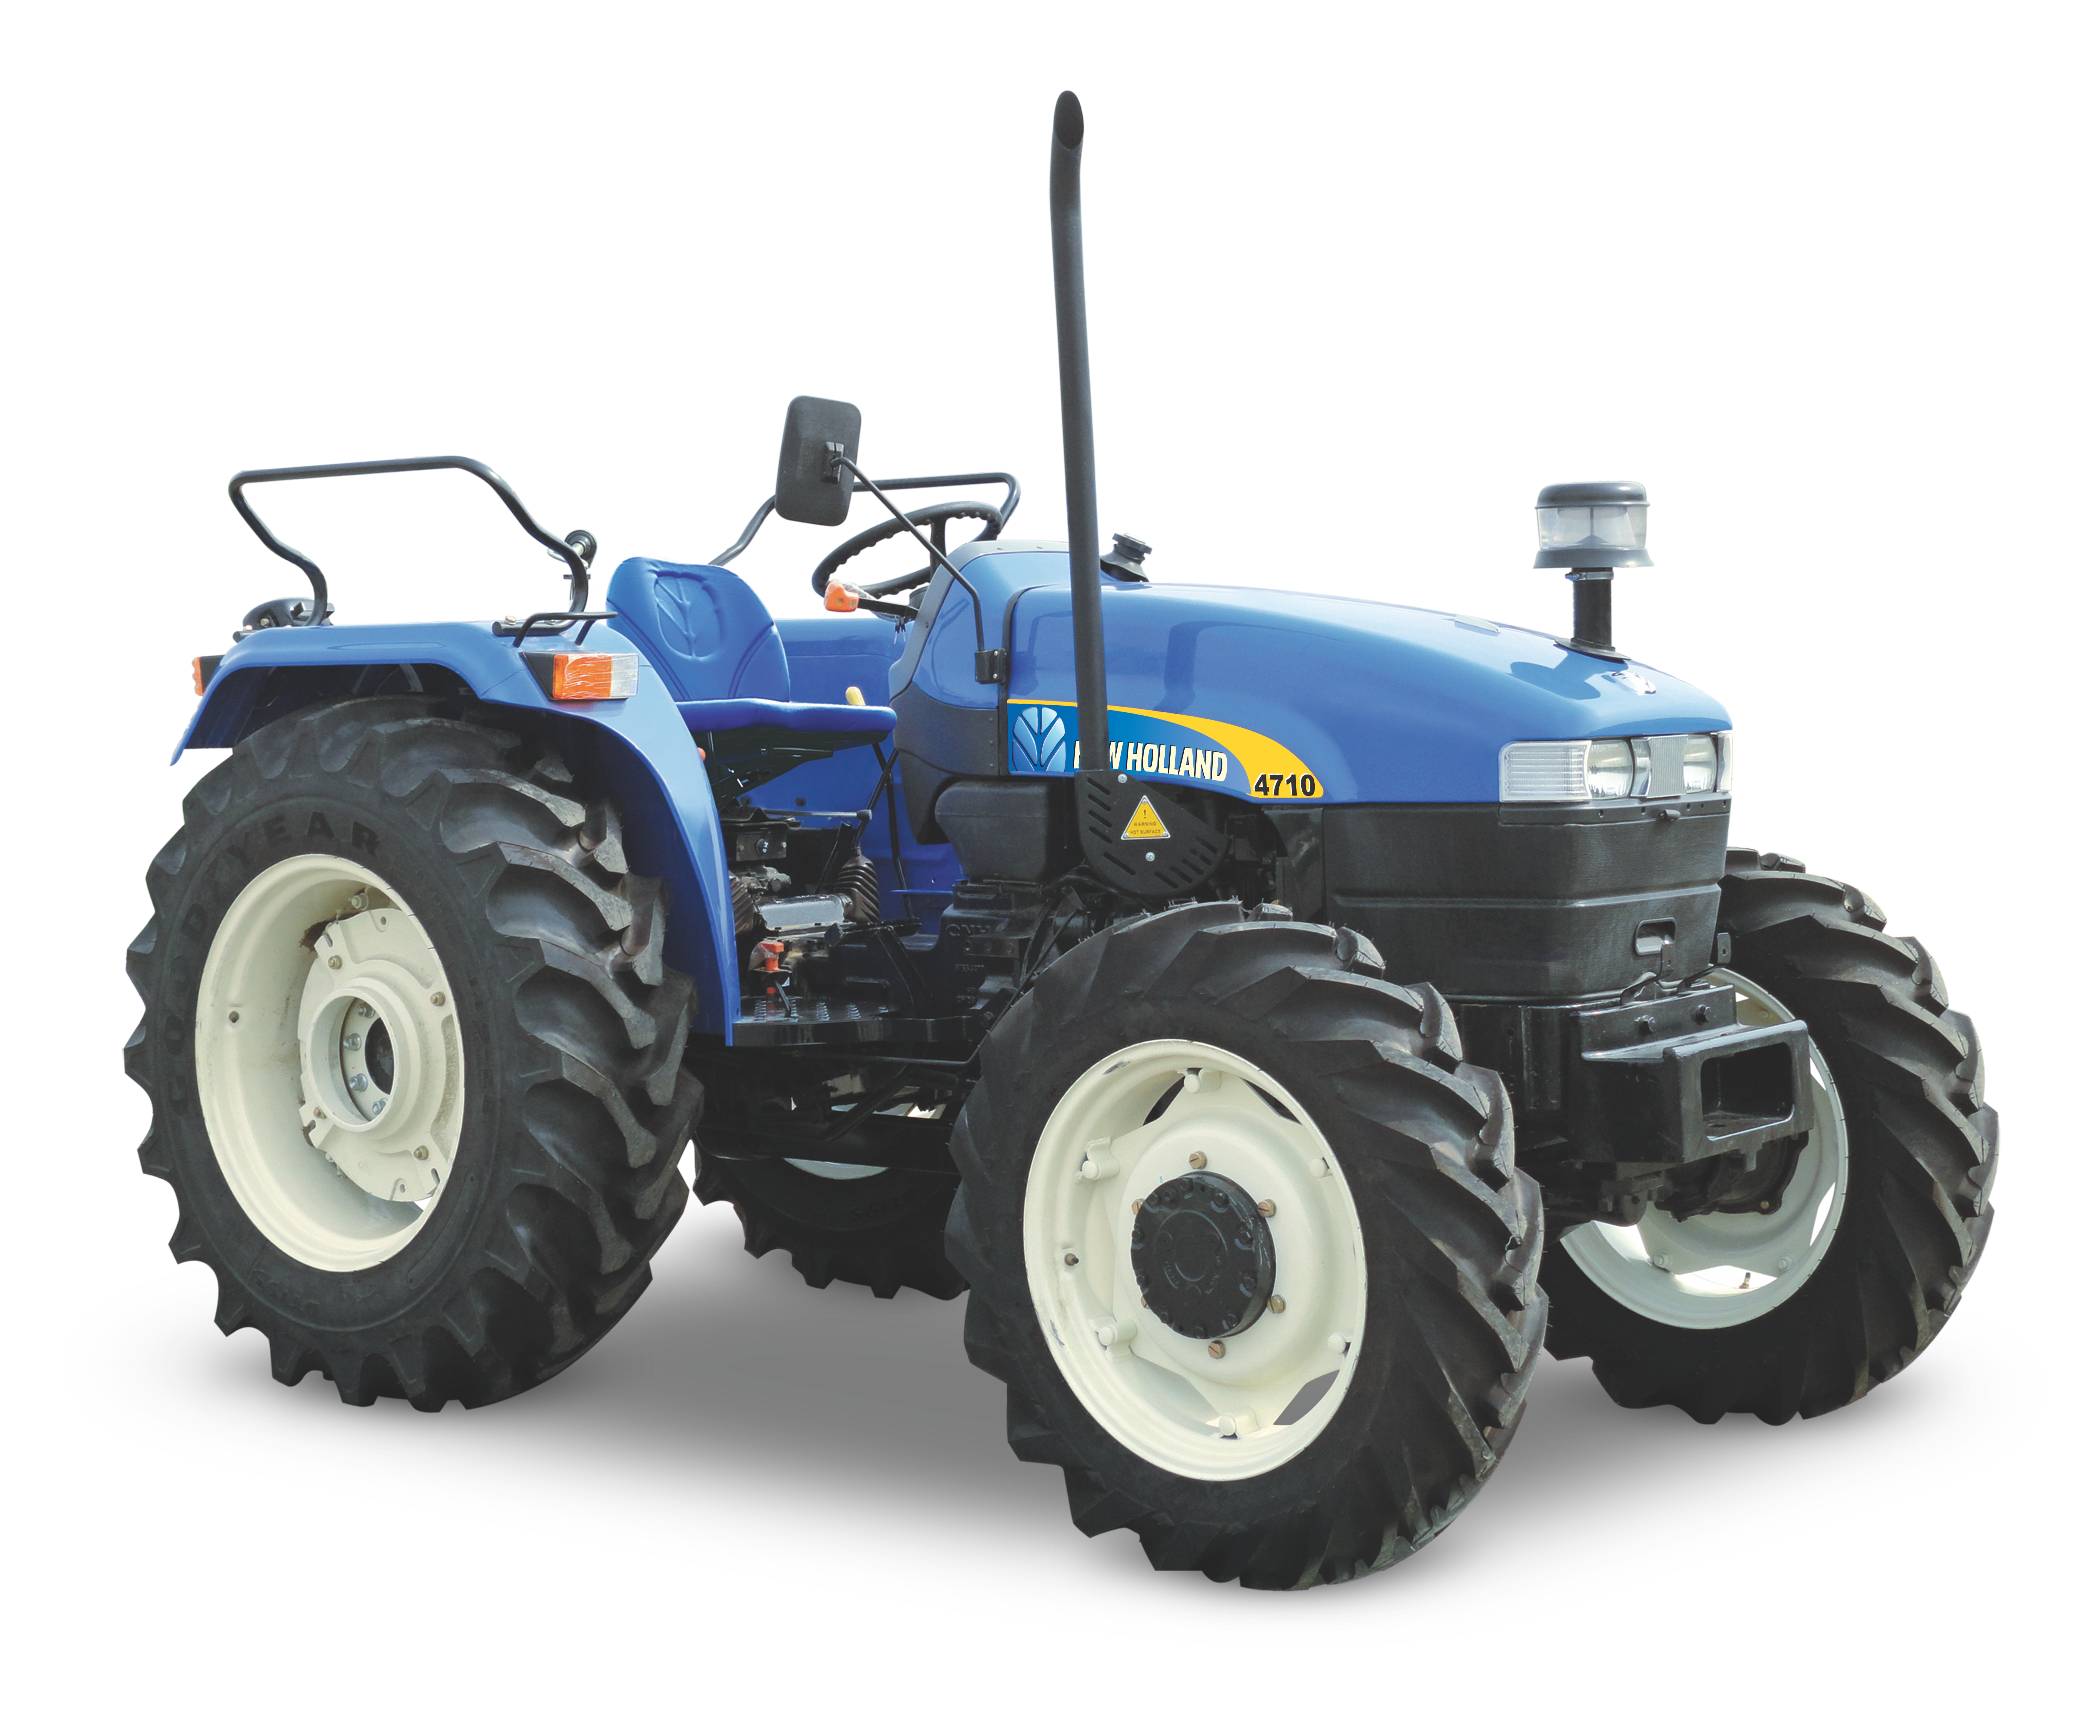 HQ New Holland Tractor Wallpapers | File 2743.01Kb